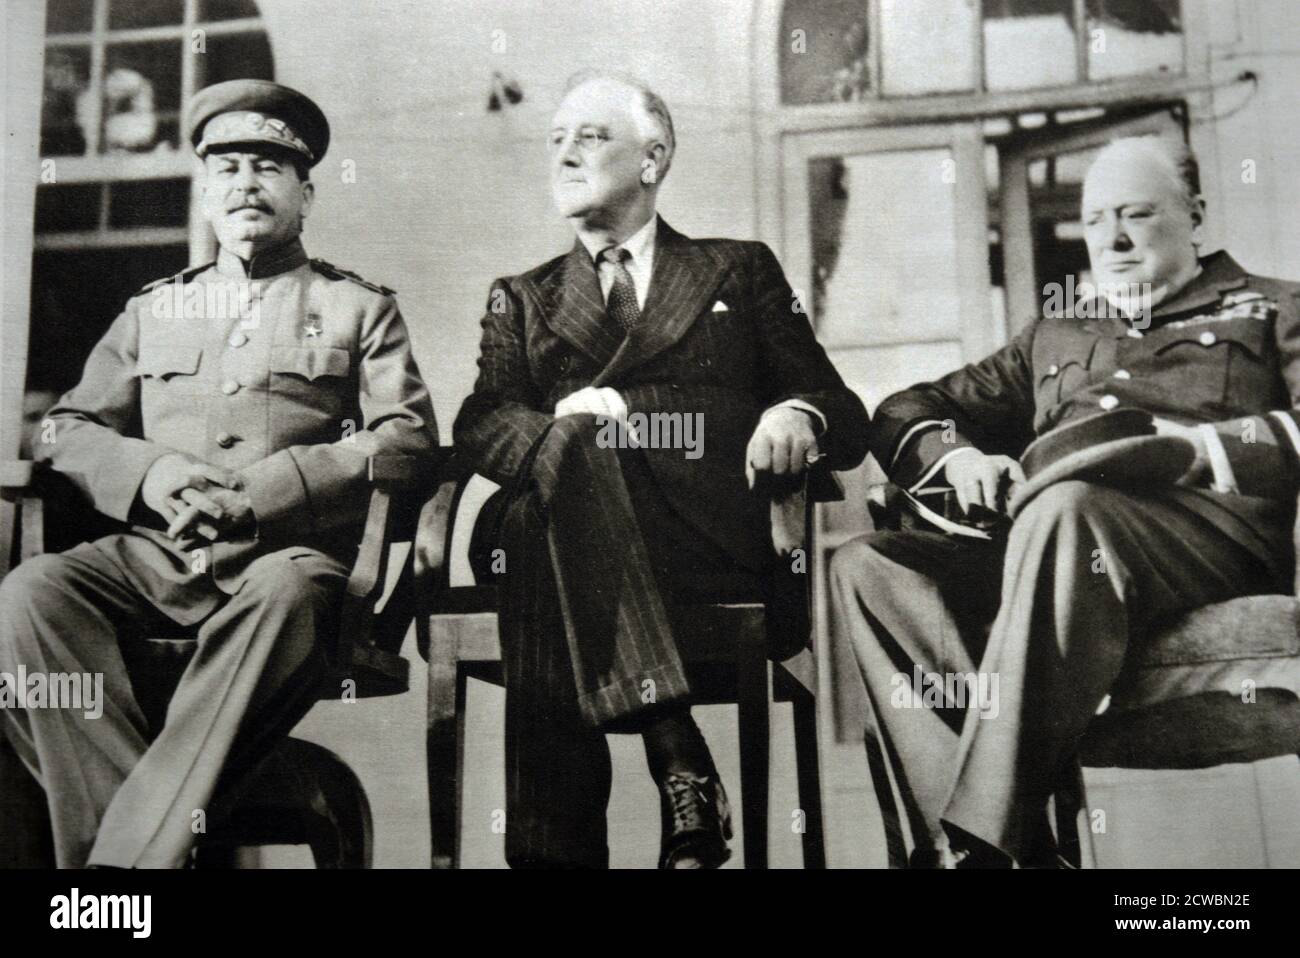 Black and white photograph of World War II (1939-1945) showing three leaders at the Tehran Conference: Soviet leader Josef Stalin (1878-1953), US President Franklin D. Roosevelt (1882-1945) and British Prime Minister Sir Winston Churchill (1874-1965). Stock Photo